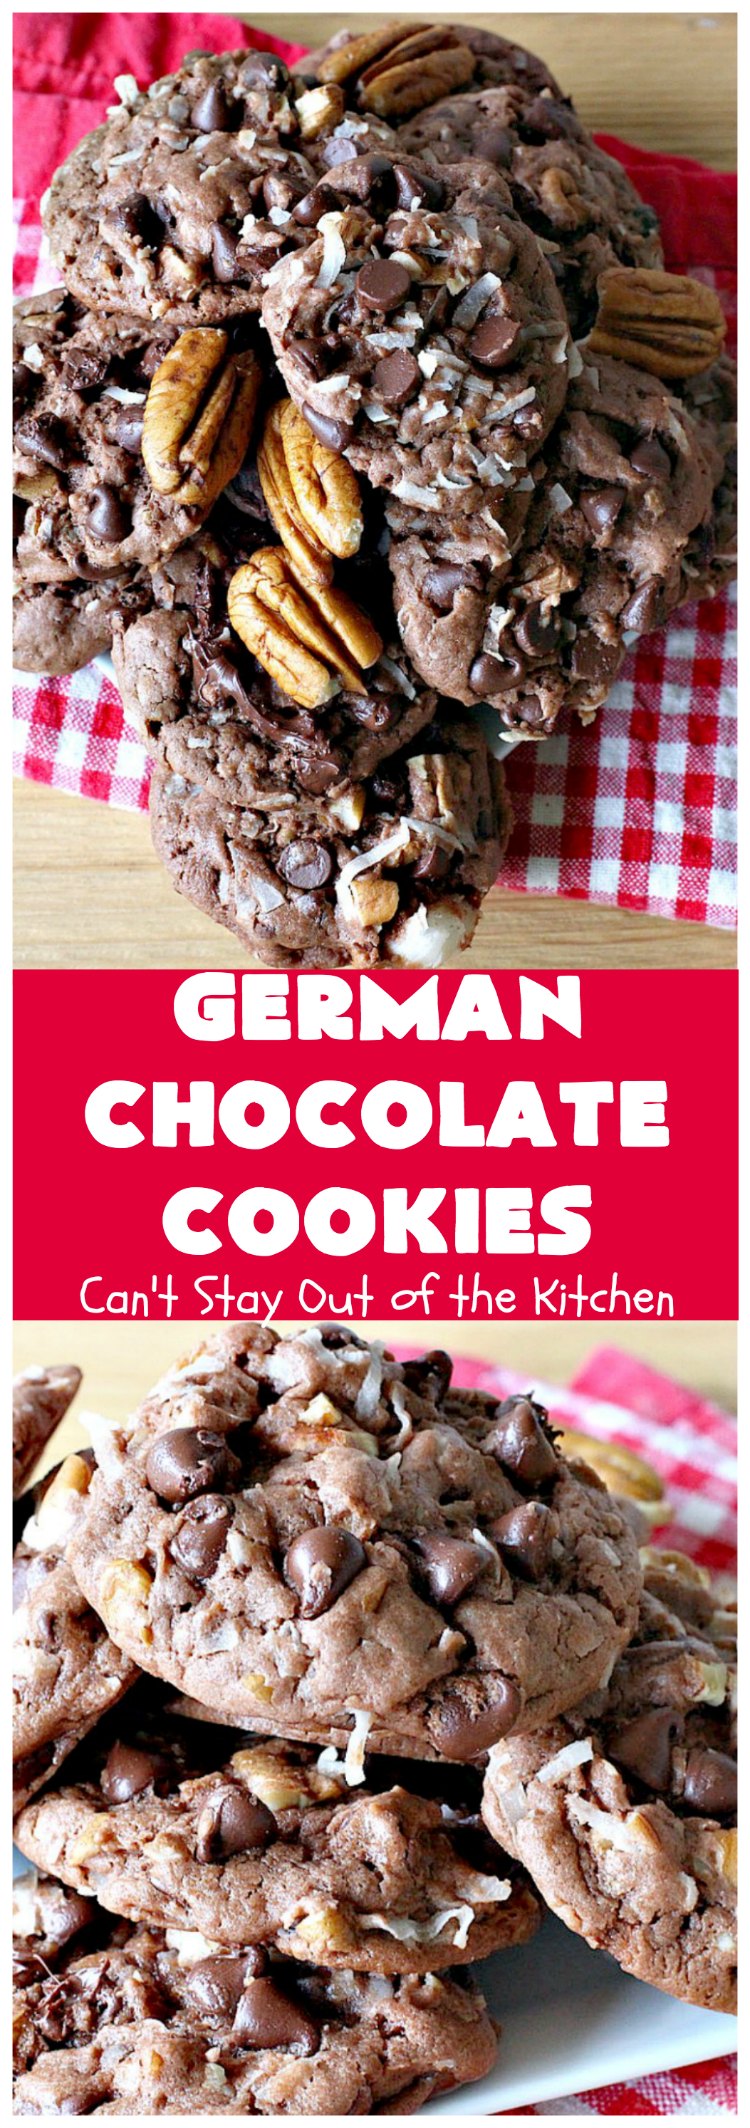 German Chocolate Cookies | Can't Stay Out of the Kitchen